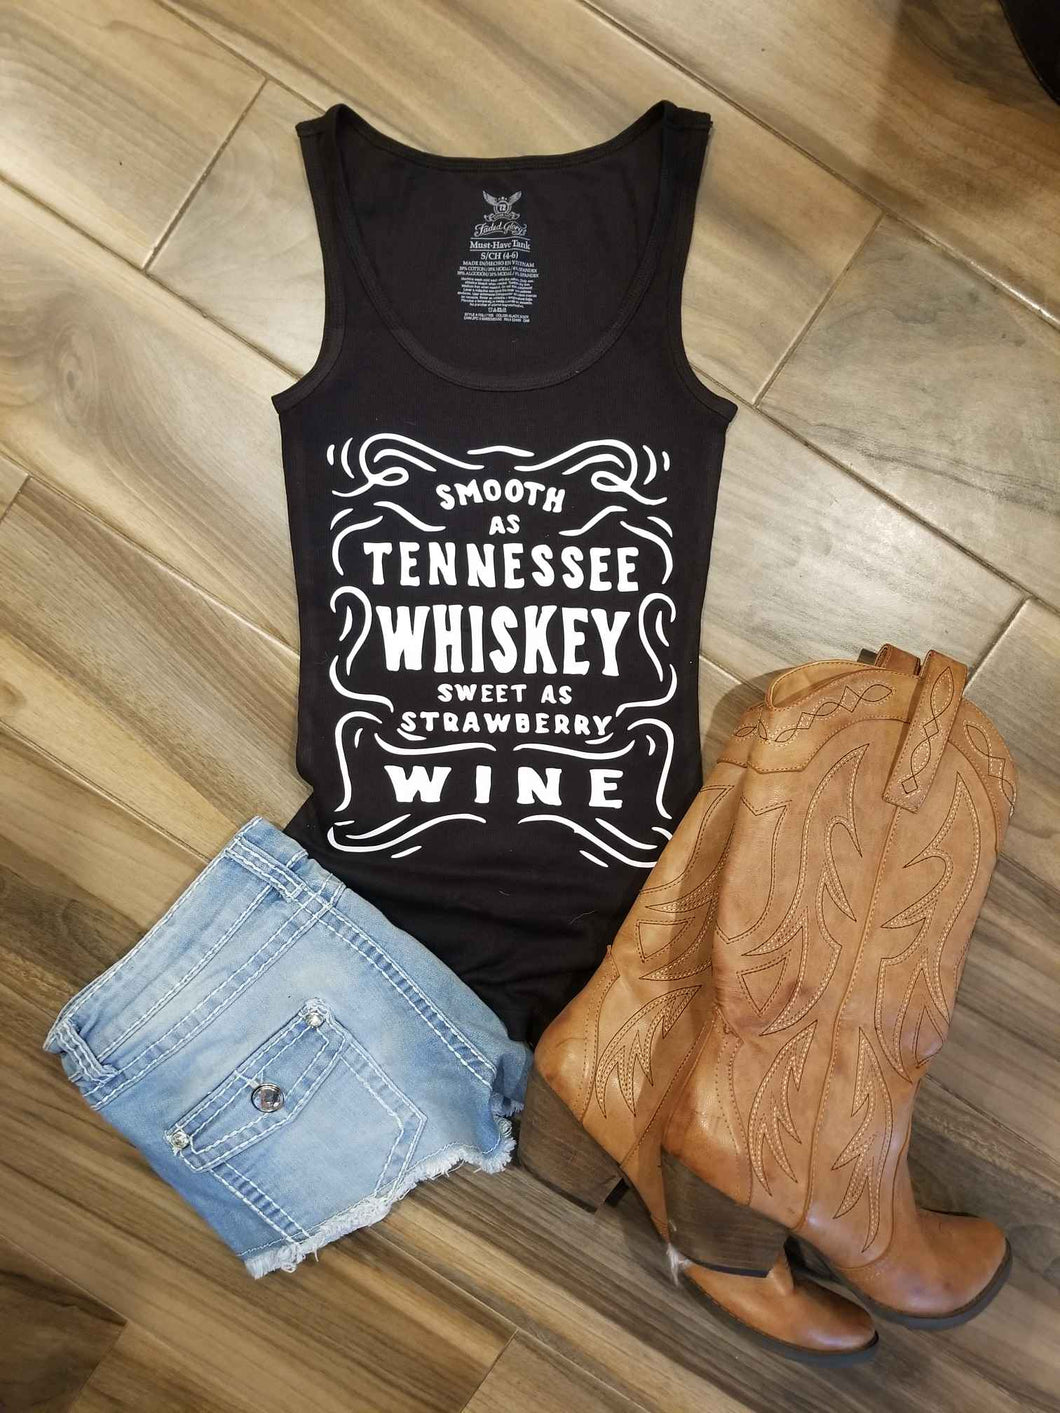 Smooth as Tennessee Whiskey Sweet as Strawberry Wine Chris Stapleton Shirt